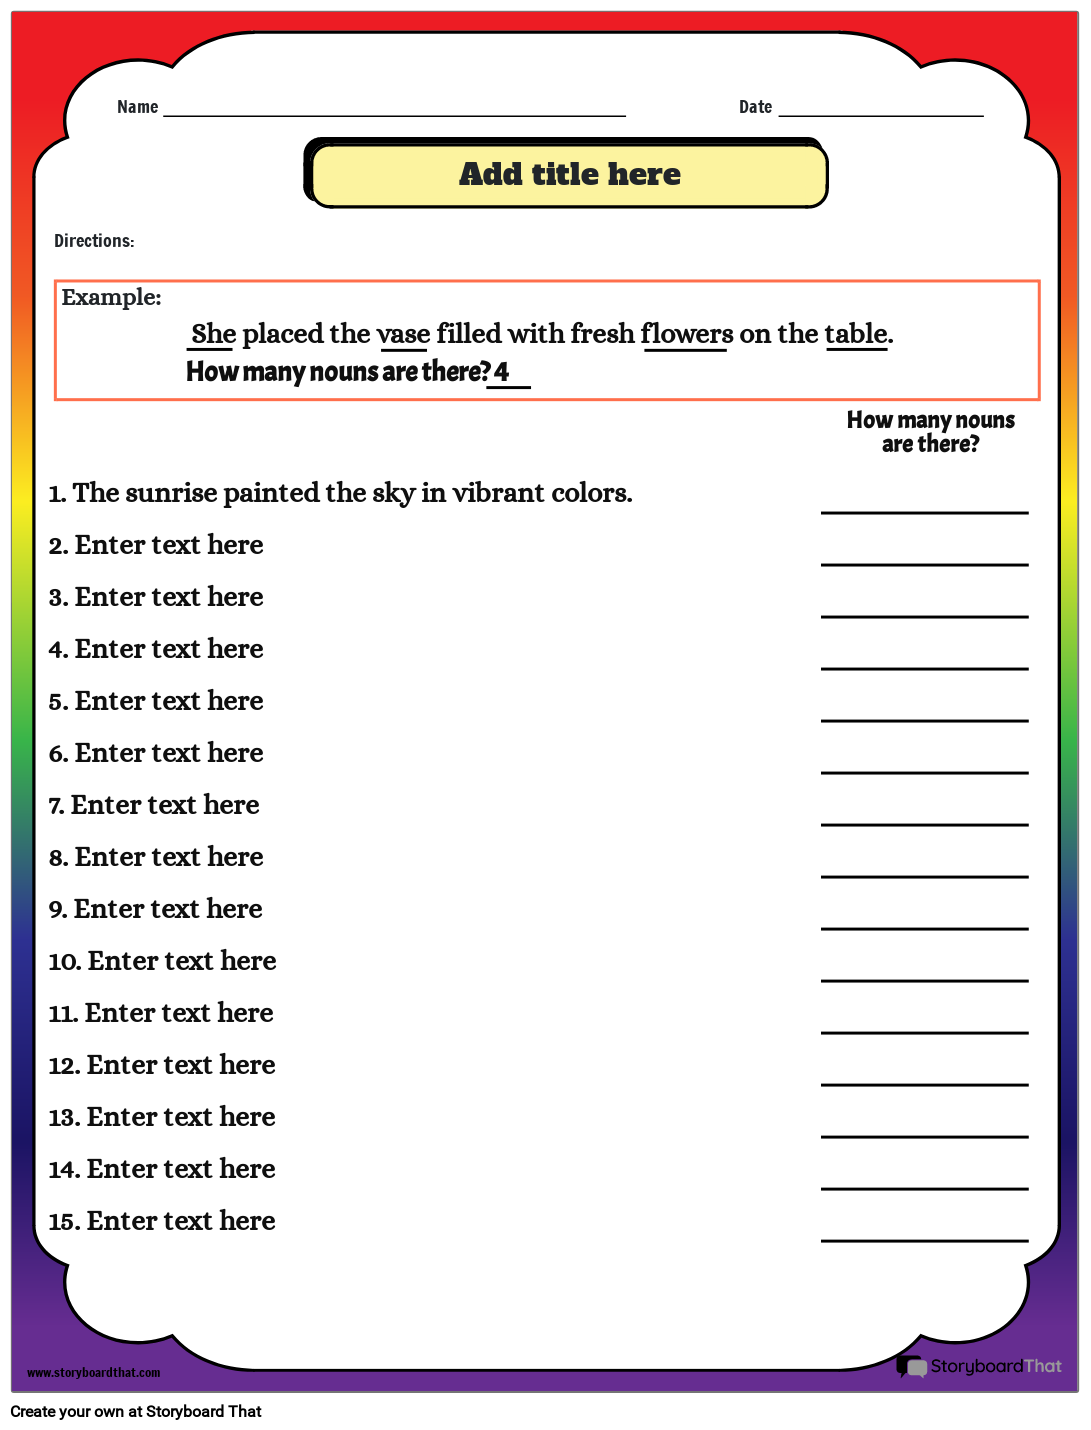 Counting Nouns in a Sentence Worksheet